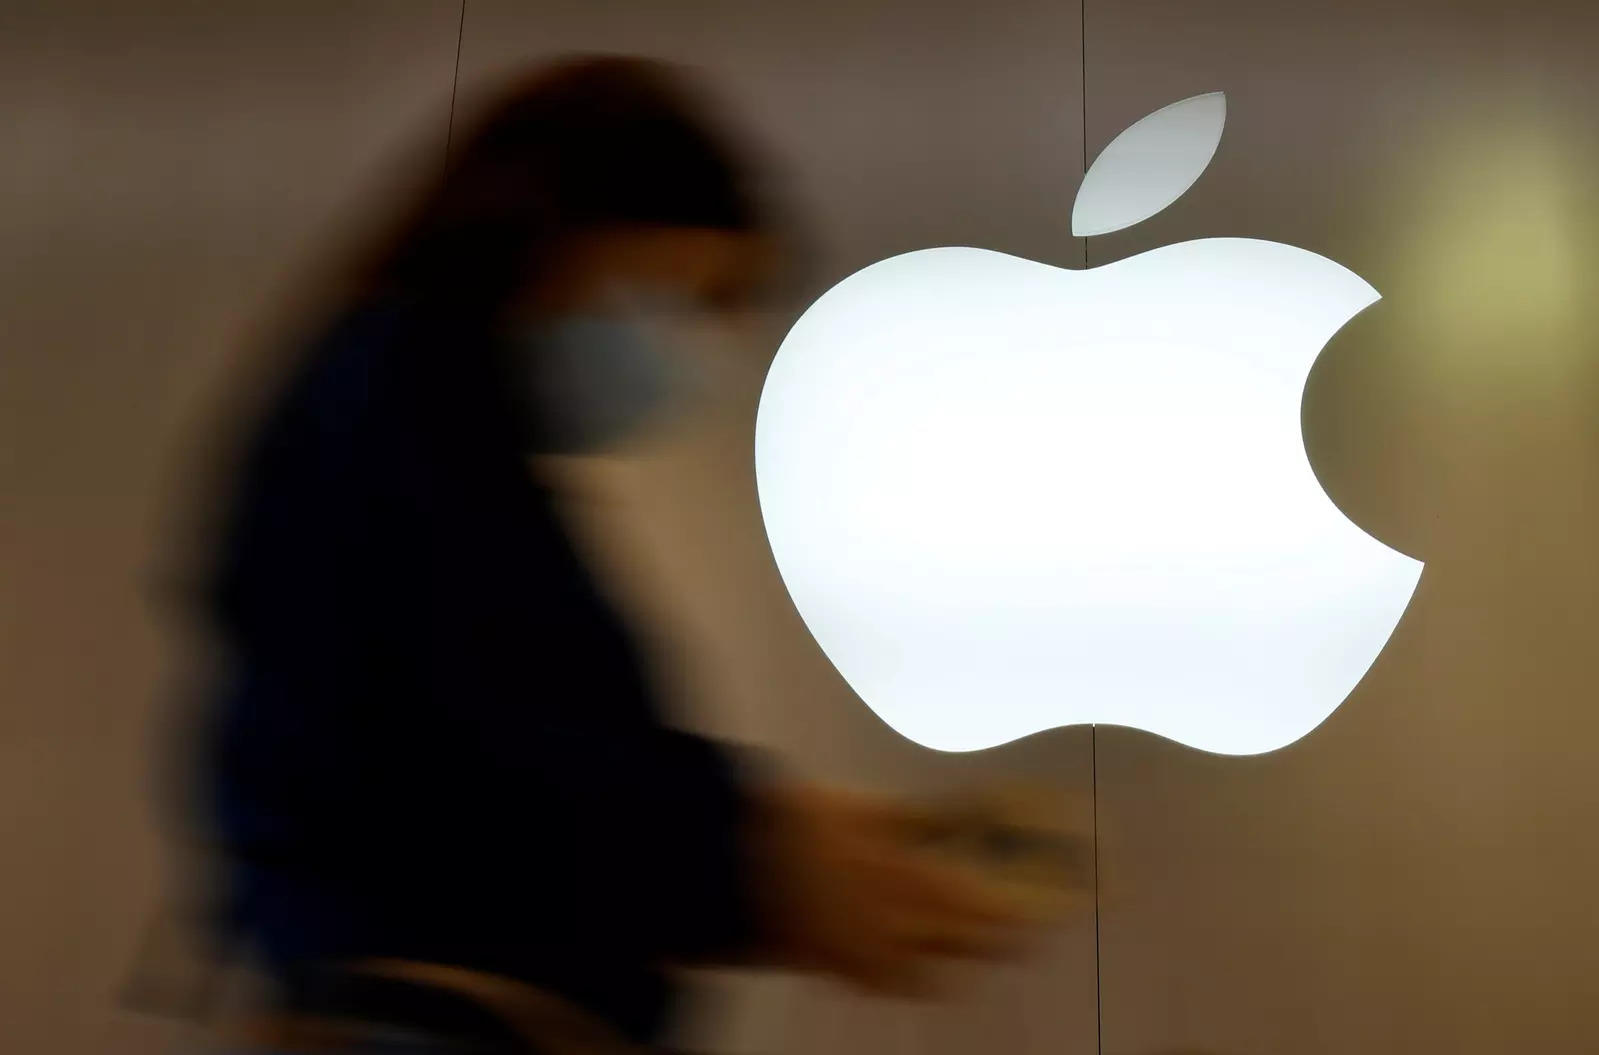 Apple will pay bonuses of up to $ 1,000 for employees in the store: Bloomberg News